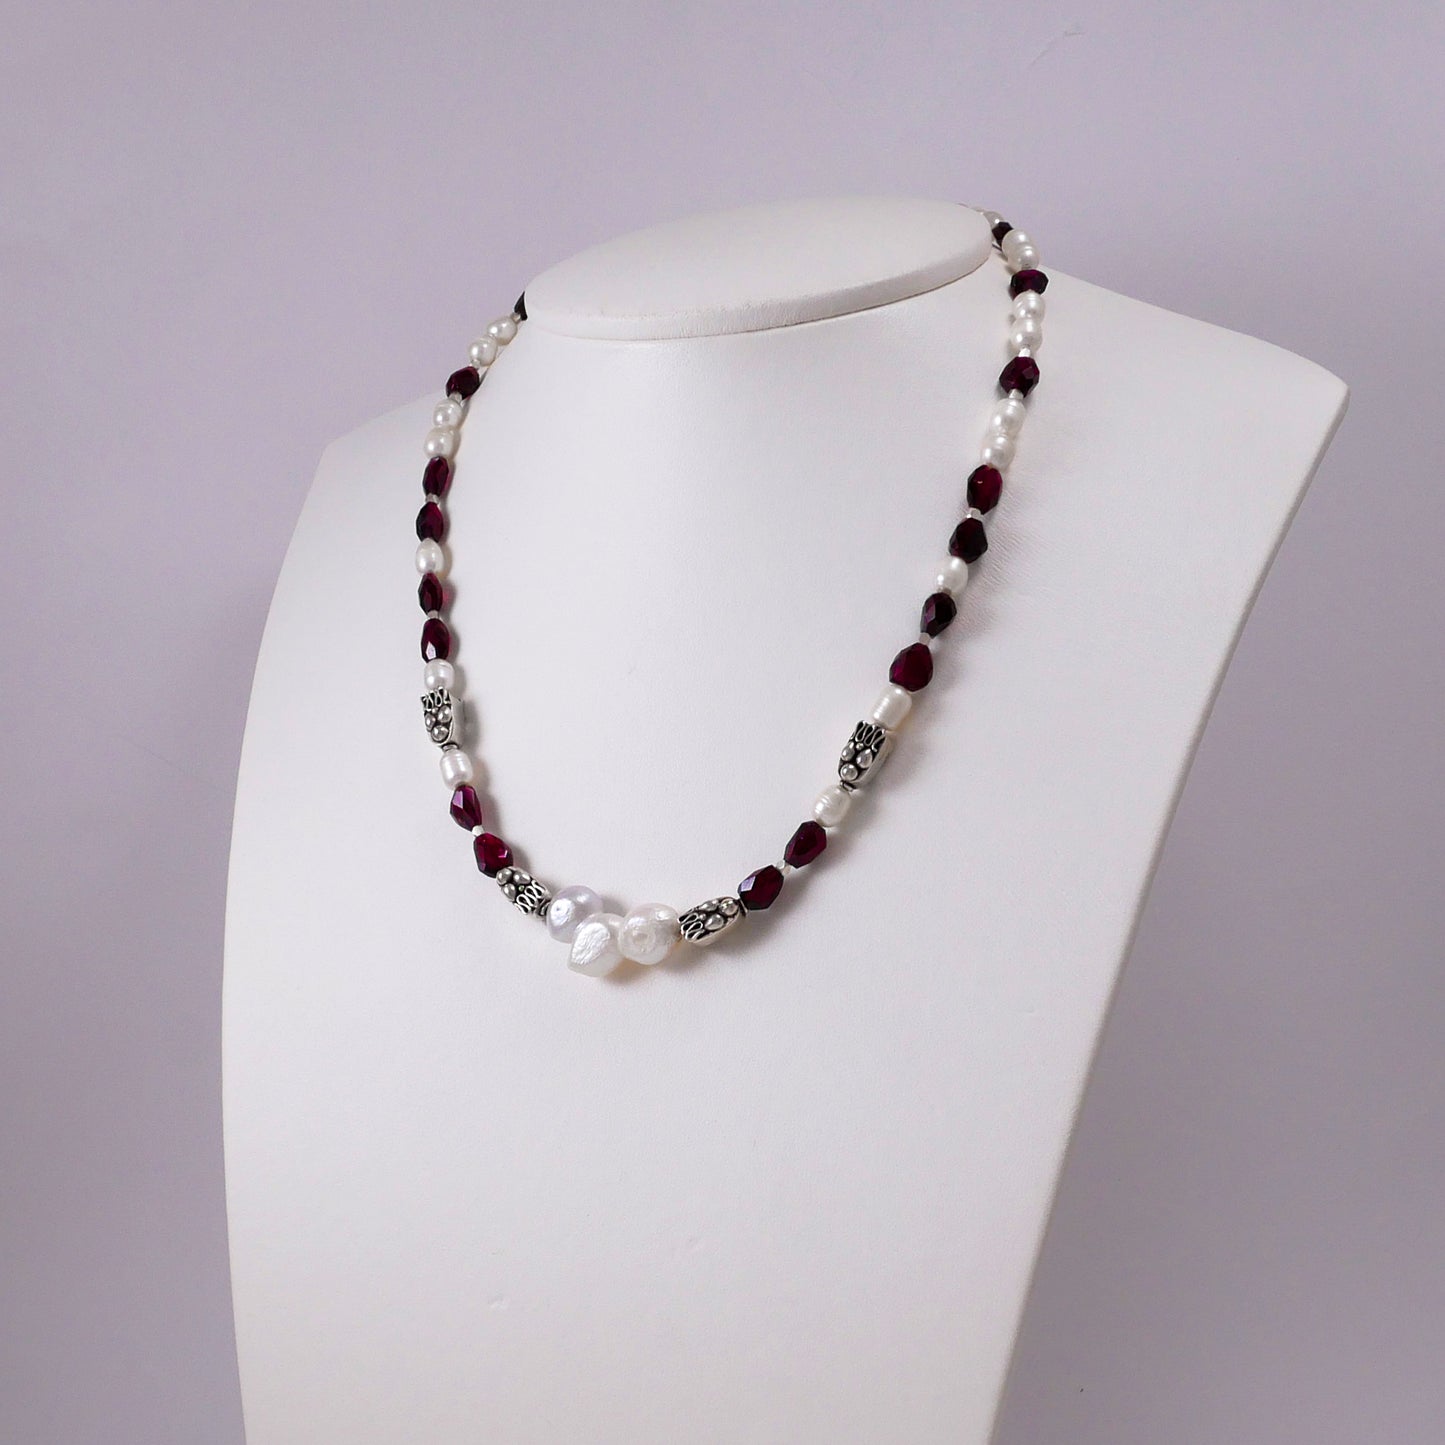 Garnets, Pearls, and Sterling Silver Necklace - Katerina Roukouna